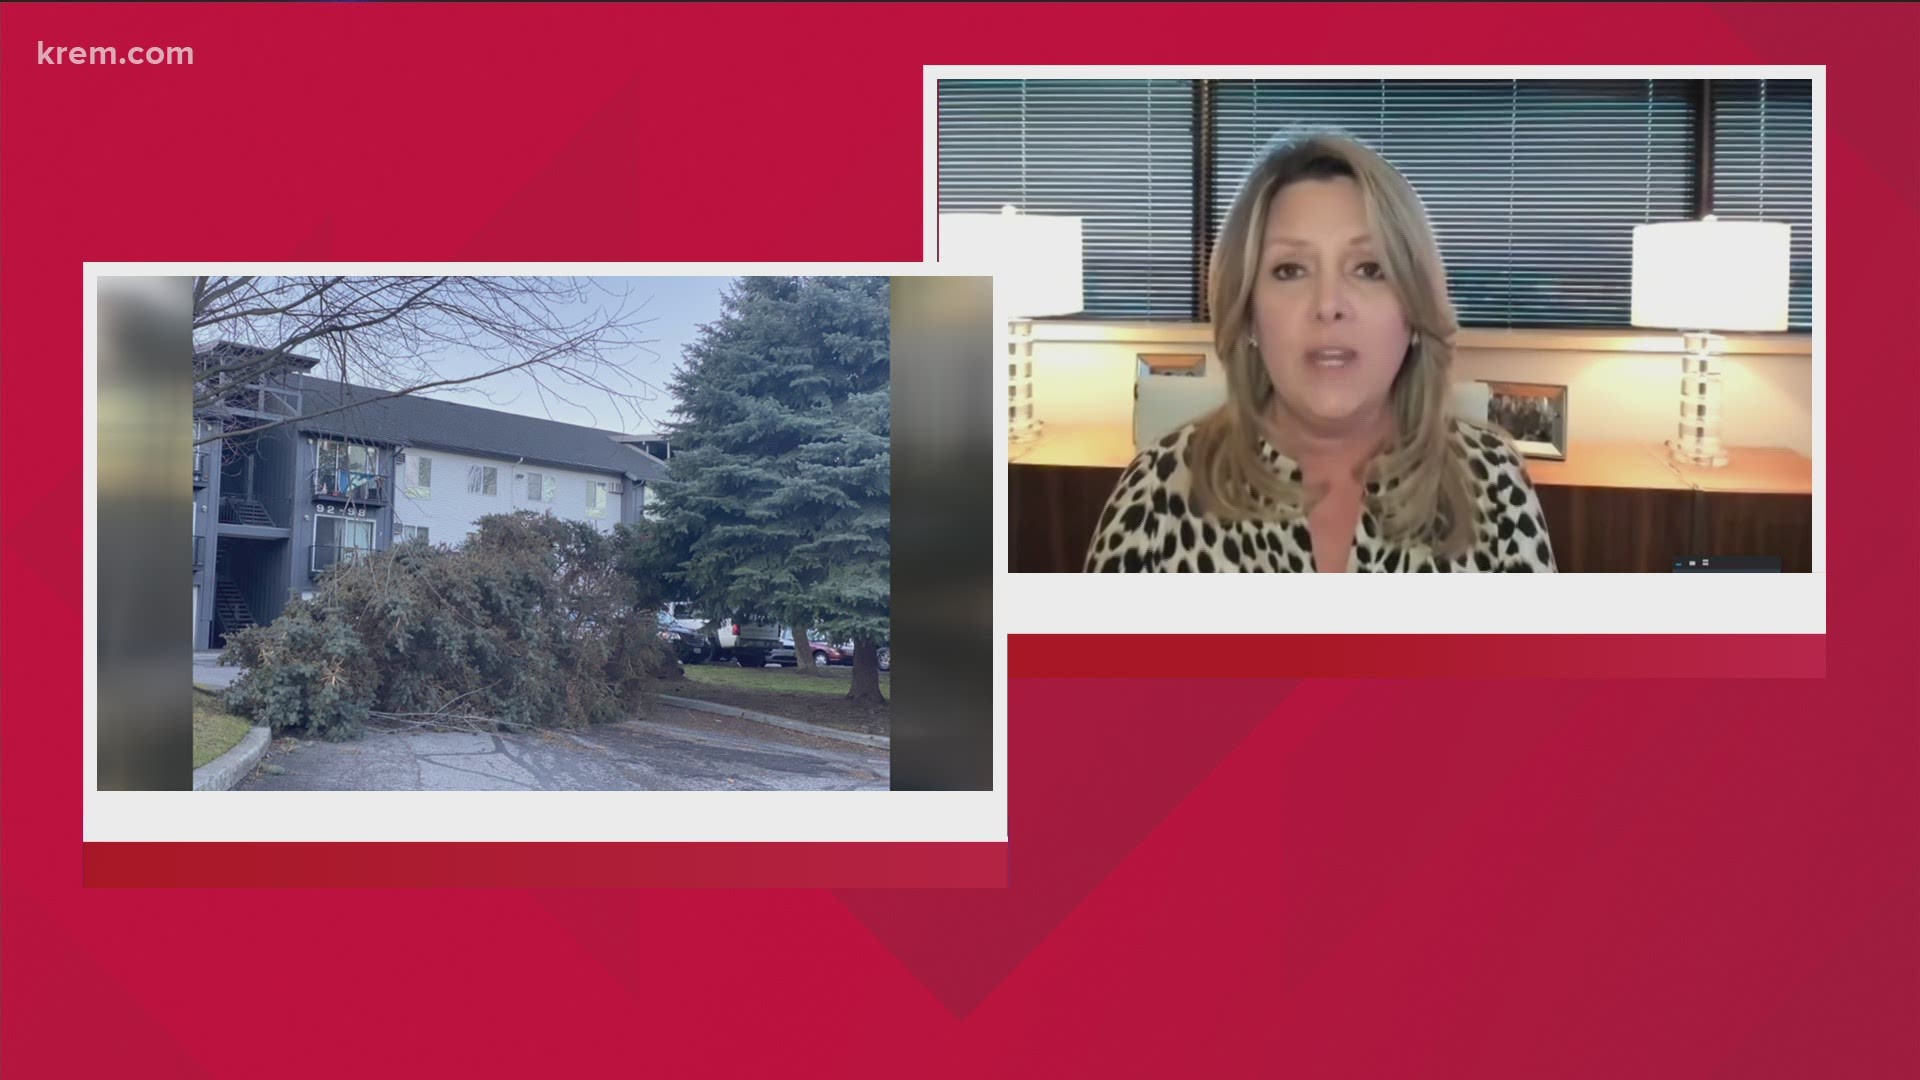 During a live interview with KREM, Mayor Nadine Woodward said Spokane "will get through this."